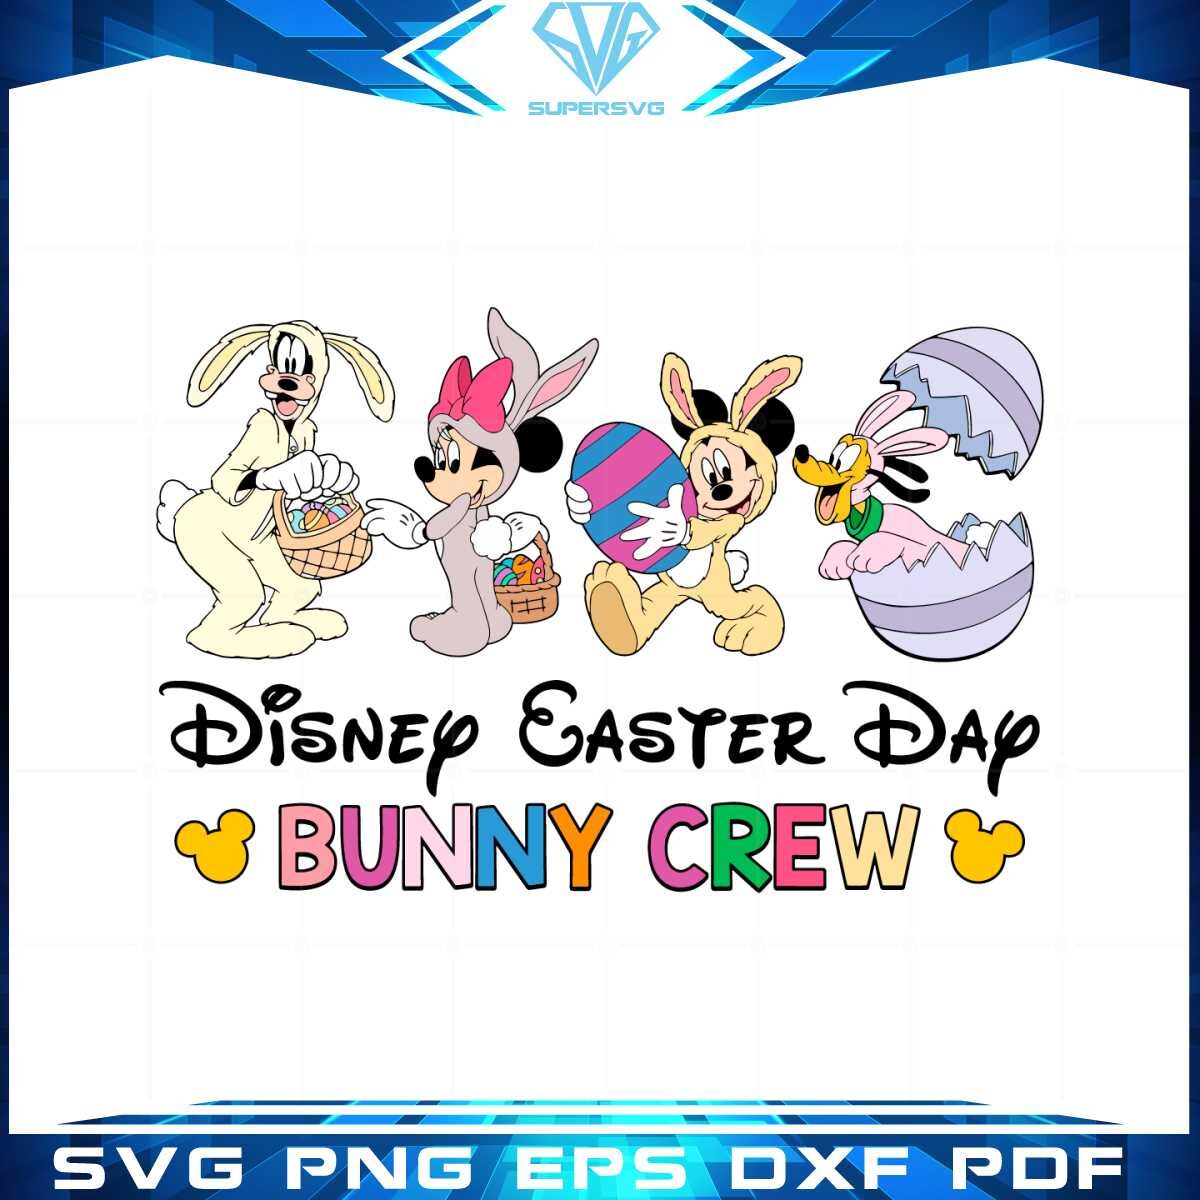 disney-easter-day-happy-crew-svg-graphic-designs-files